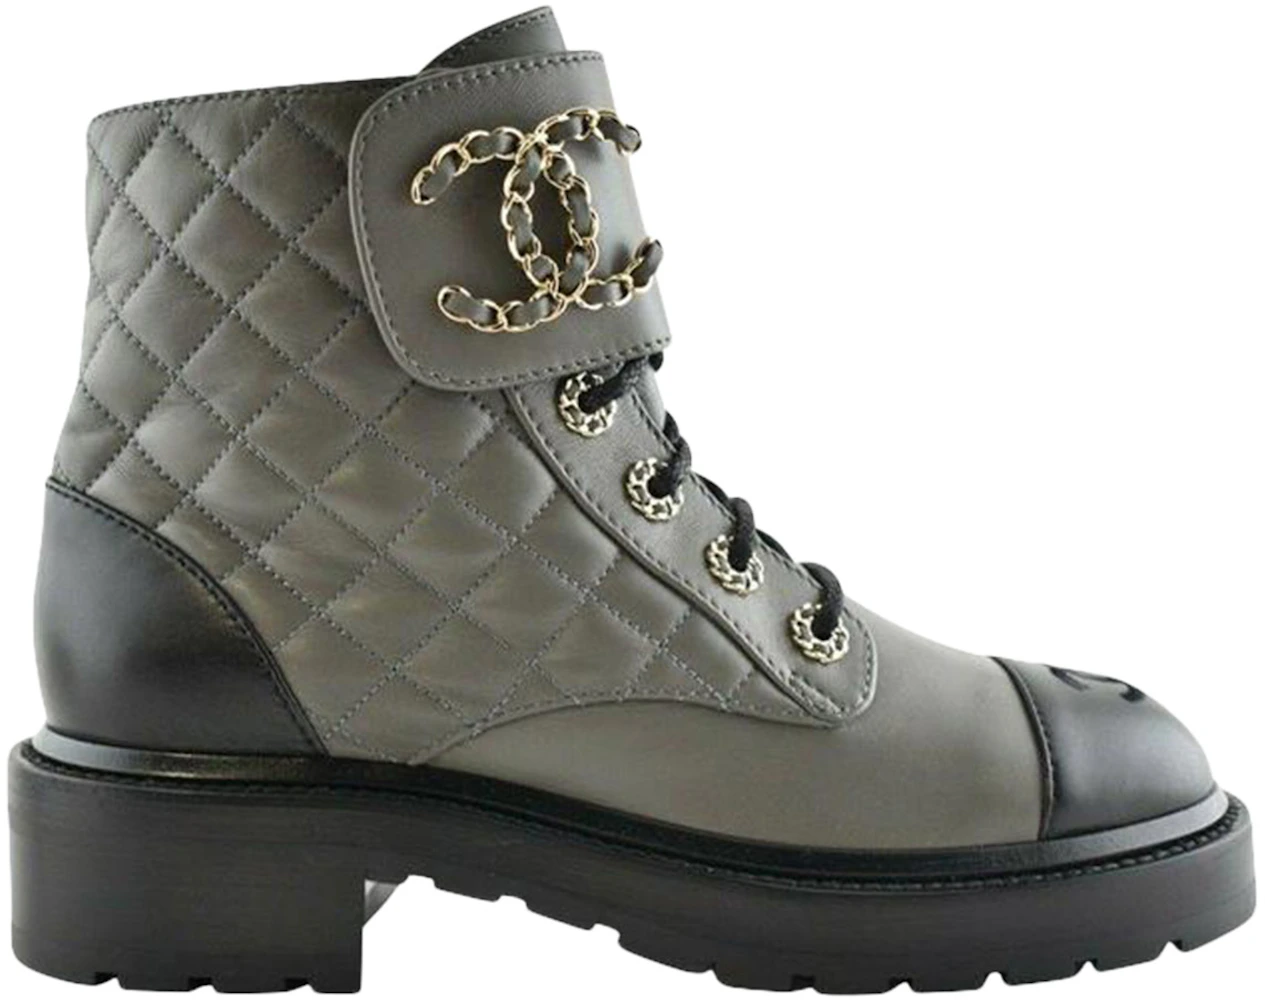 Leather boots Chanel Metallic size 37.5 EU in Leather - 25300662